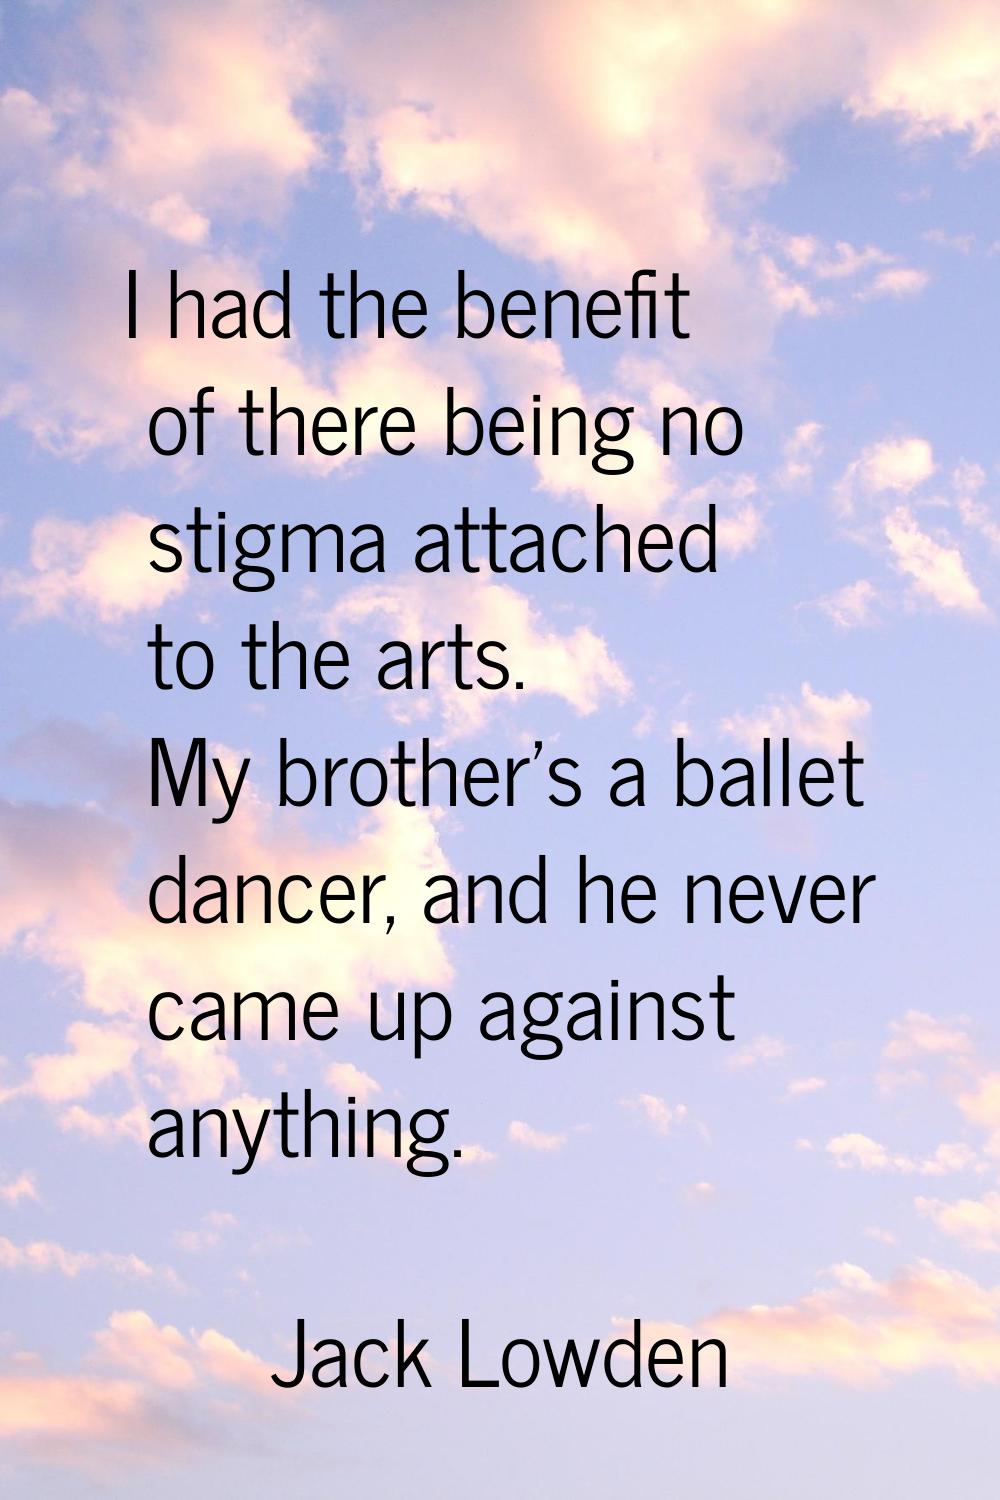 I had the benefit of there being no stigma attached to the arts. My brother's a ballet dancer, and 